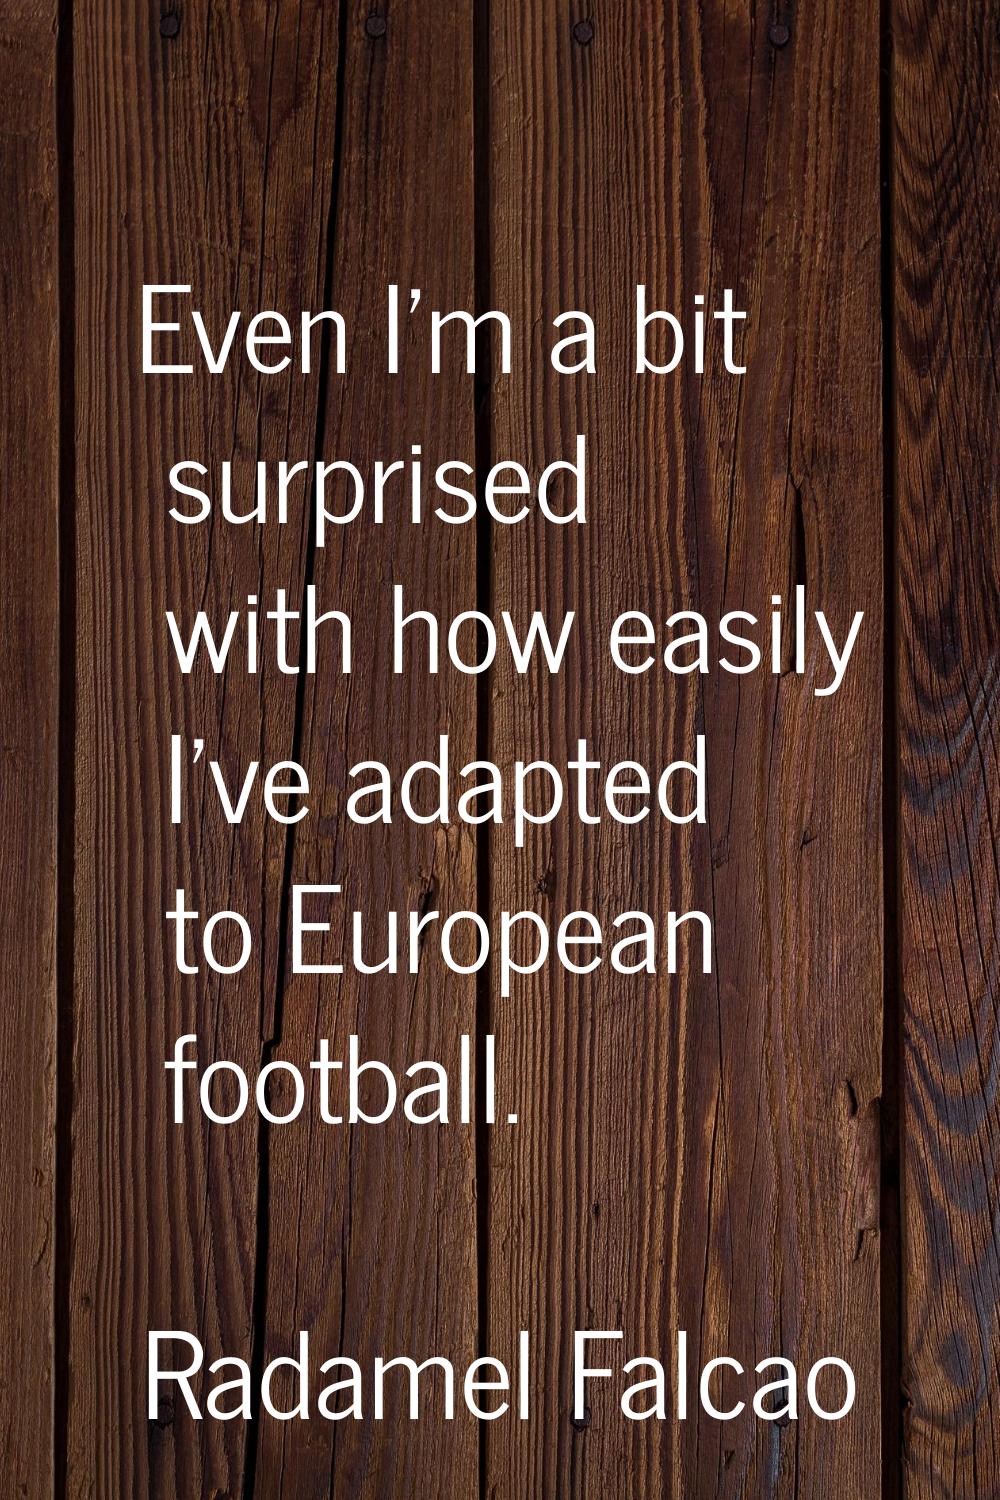 Even I'm a bit surprised with how easily I've adapted to European football.